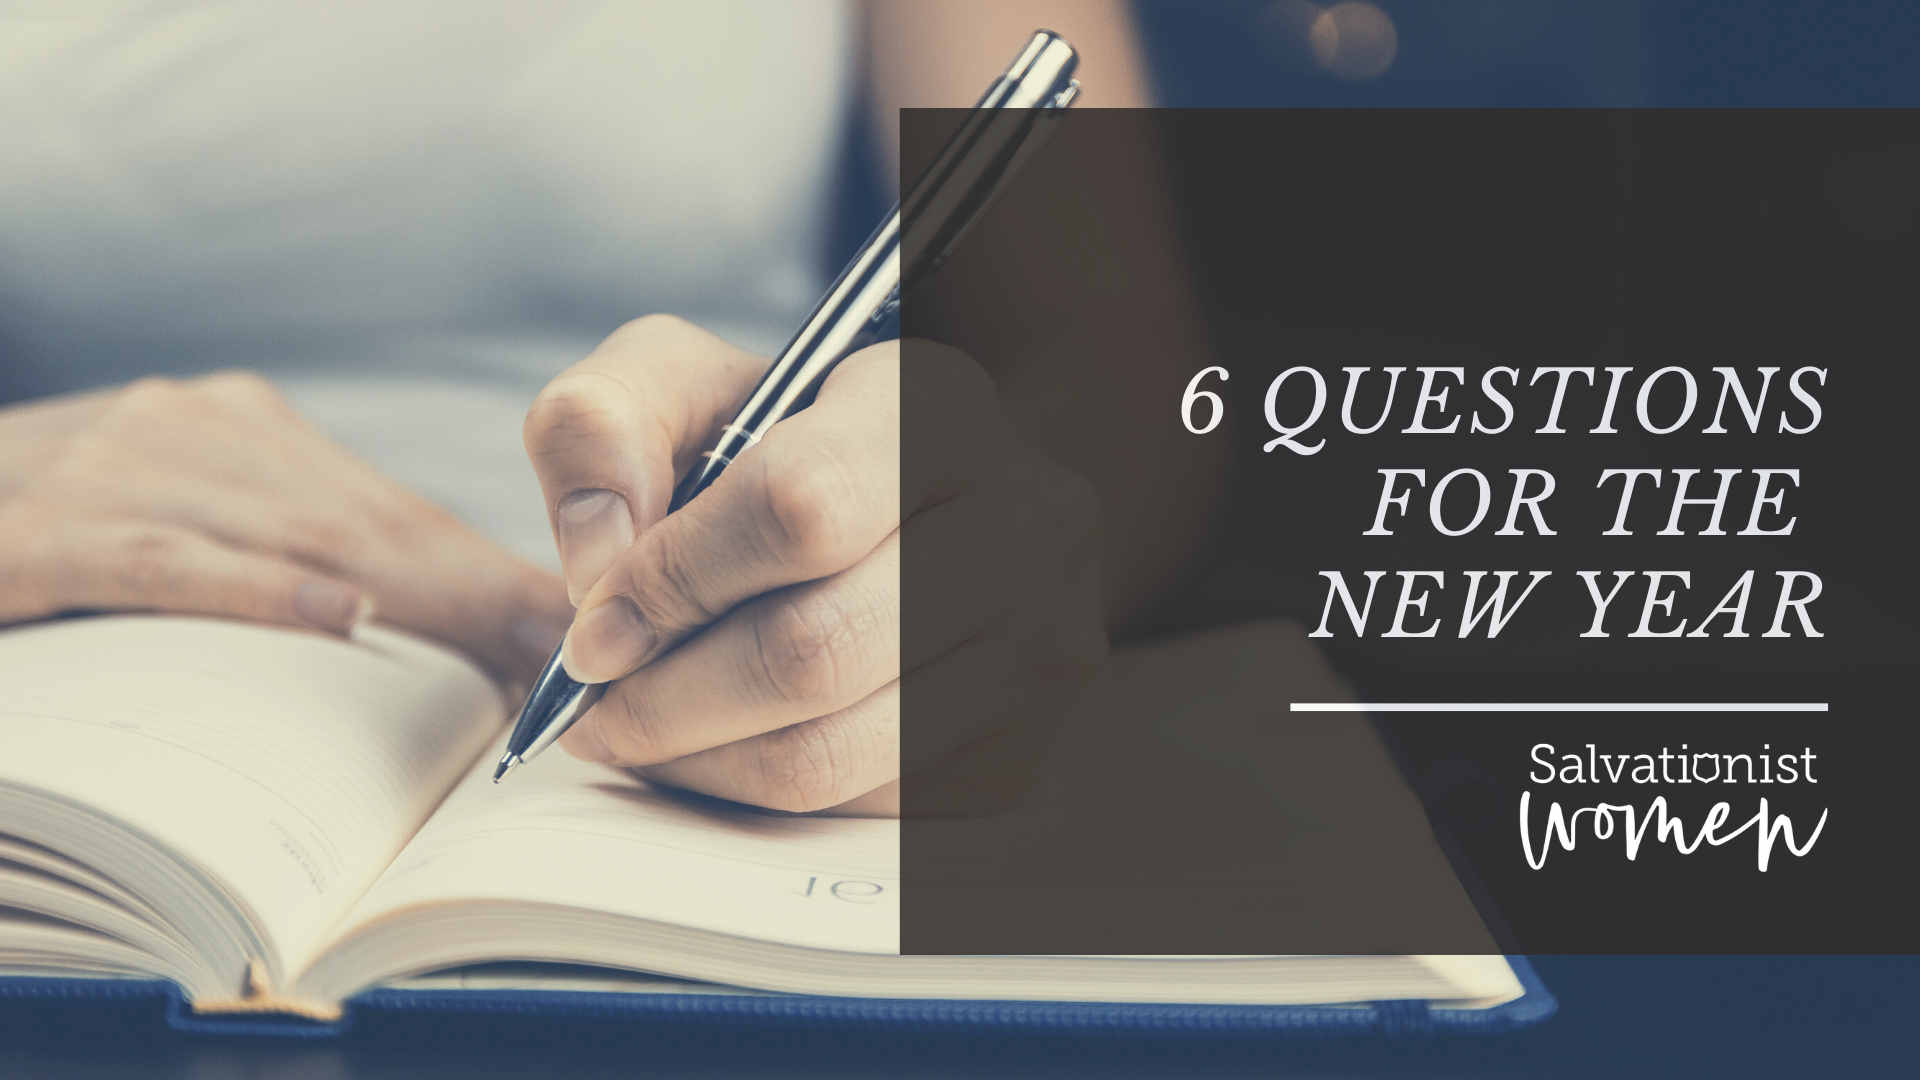 6 Questions for the New Year